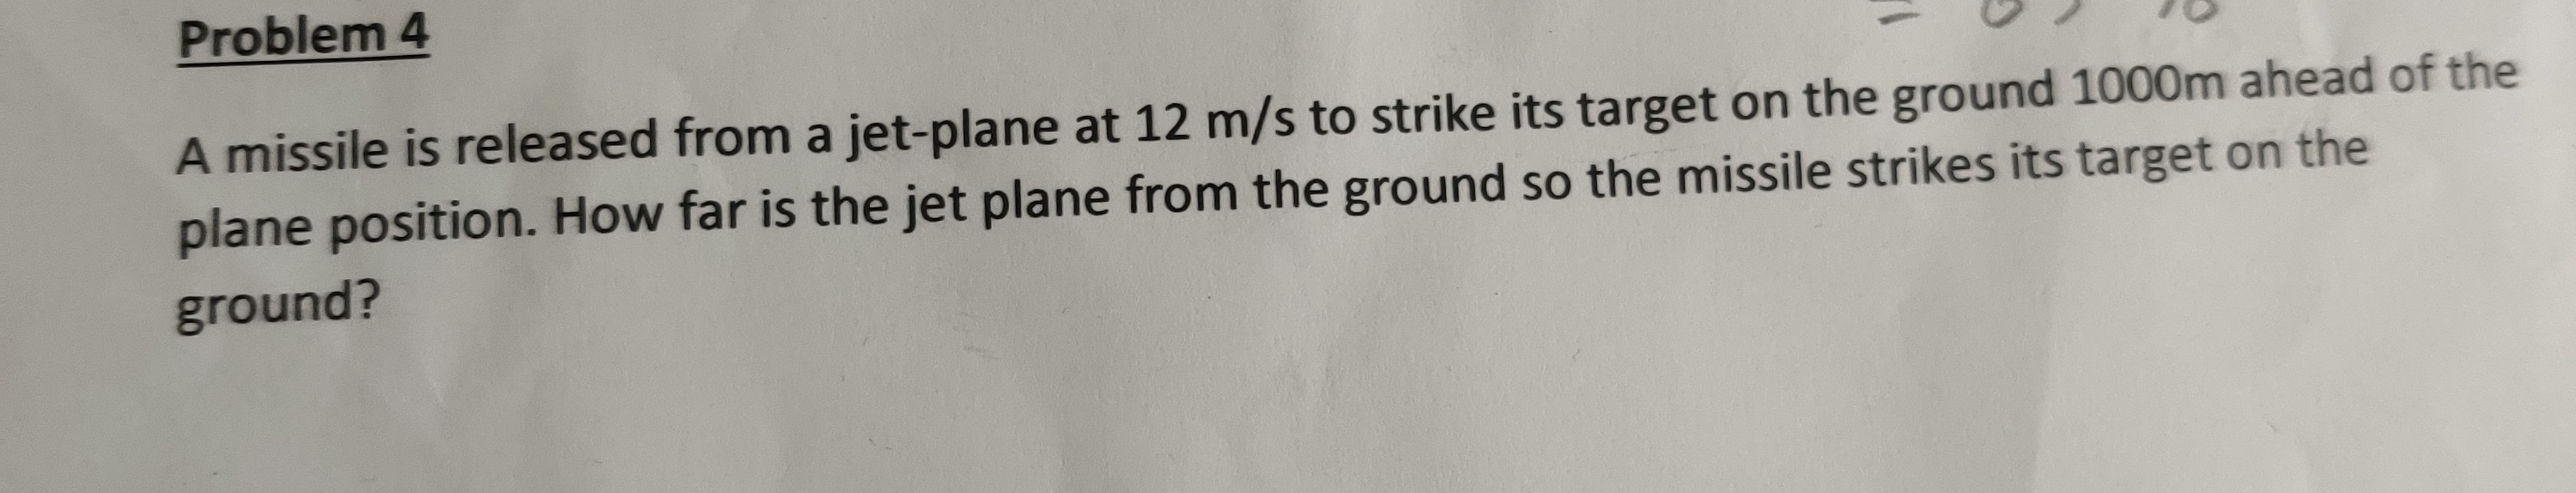 Problem 4
A missile is released from a jet-plane at 12 m/s to strike its target on the ground 1000m ahead of the
plane position. How far is the jet plane from the ground so the missile strikes its target on the
ground?
